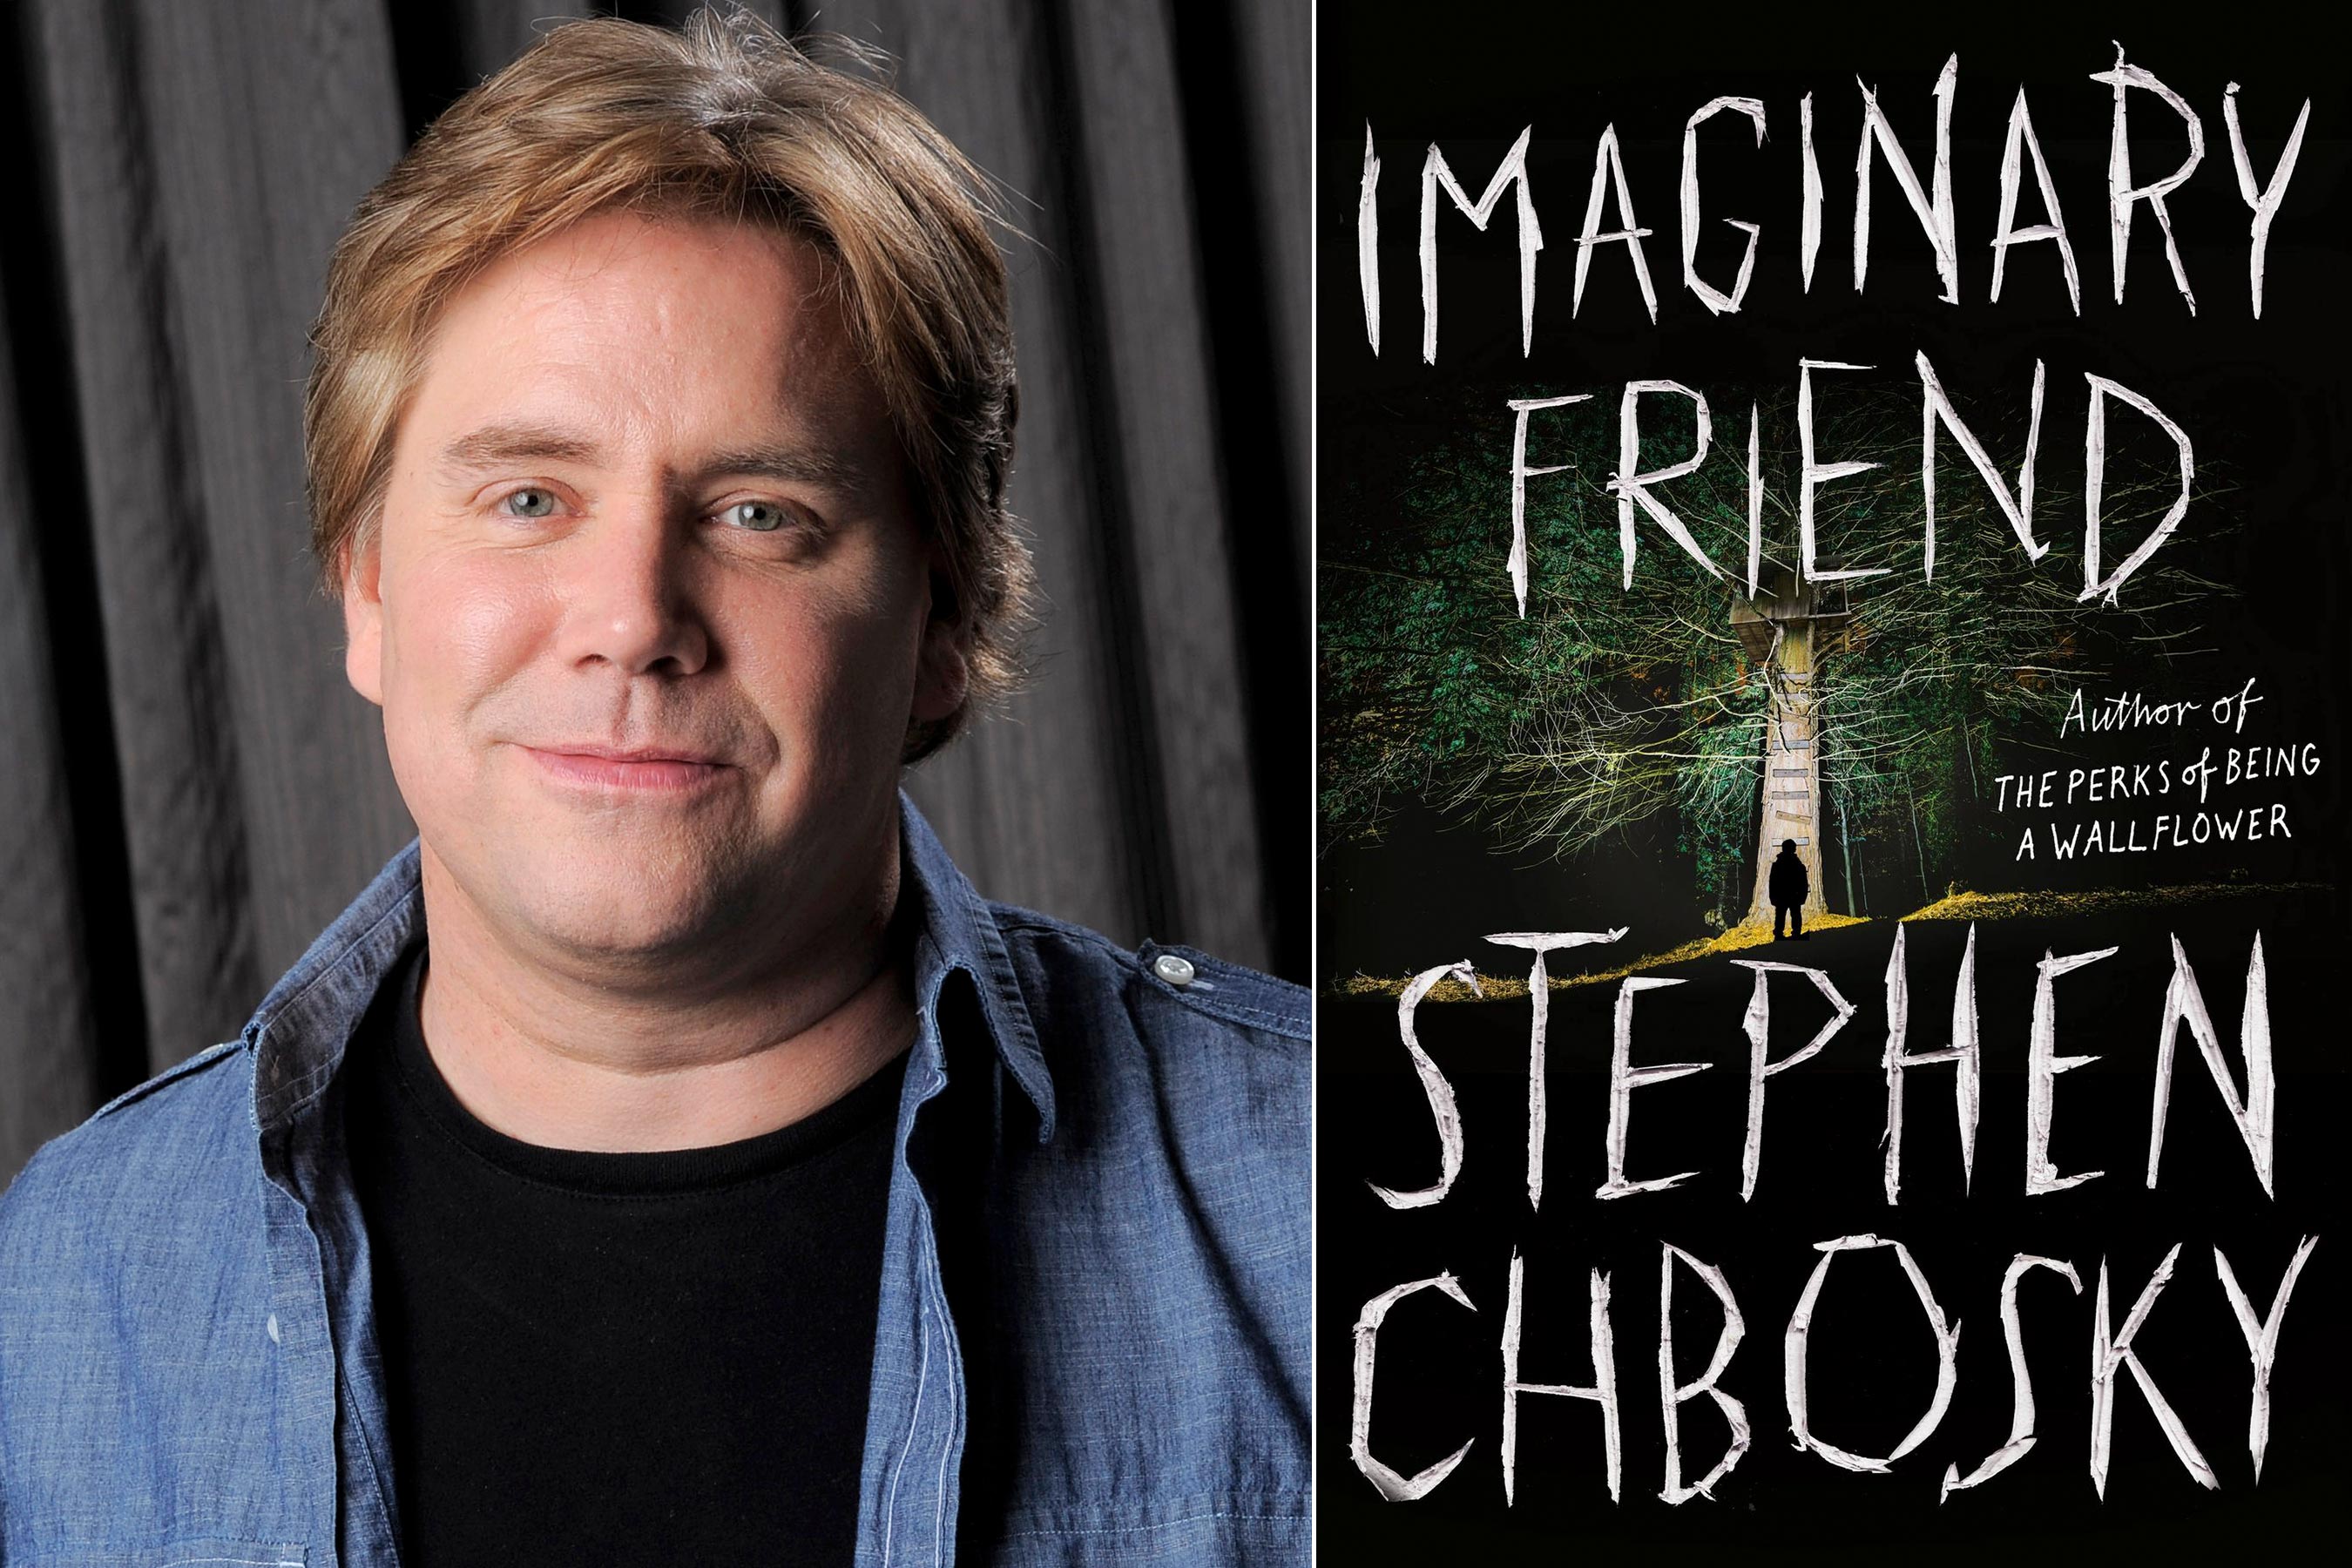 Stephen Chbosky releases new book 20 years after the ‘The Perks of Being a Wallflower'